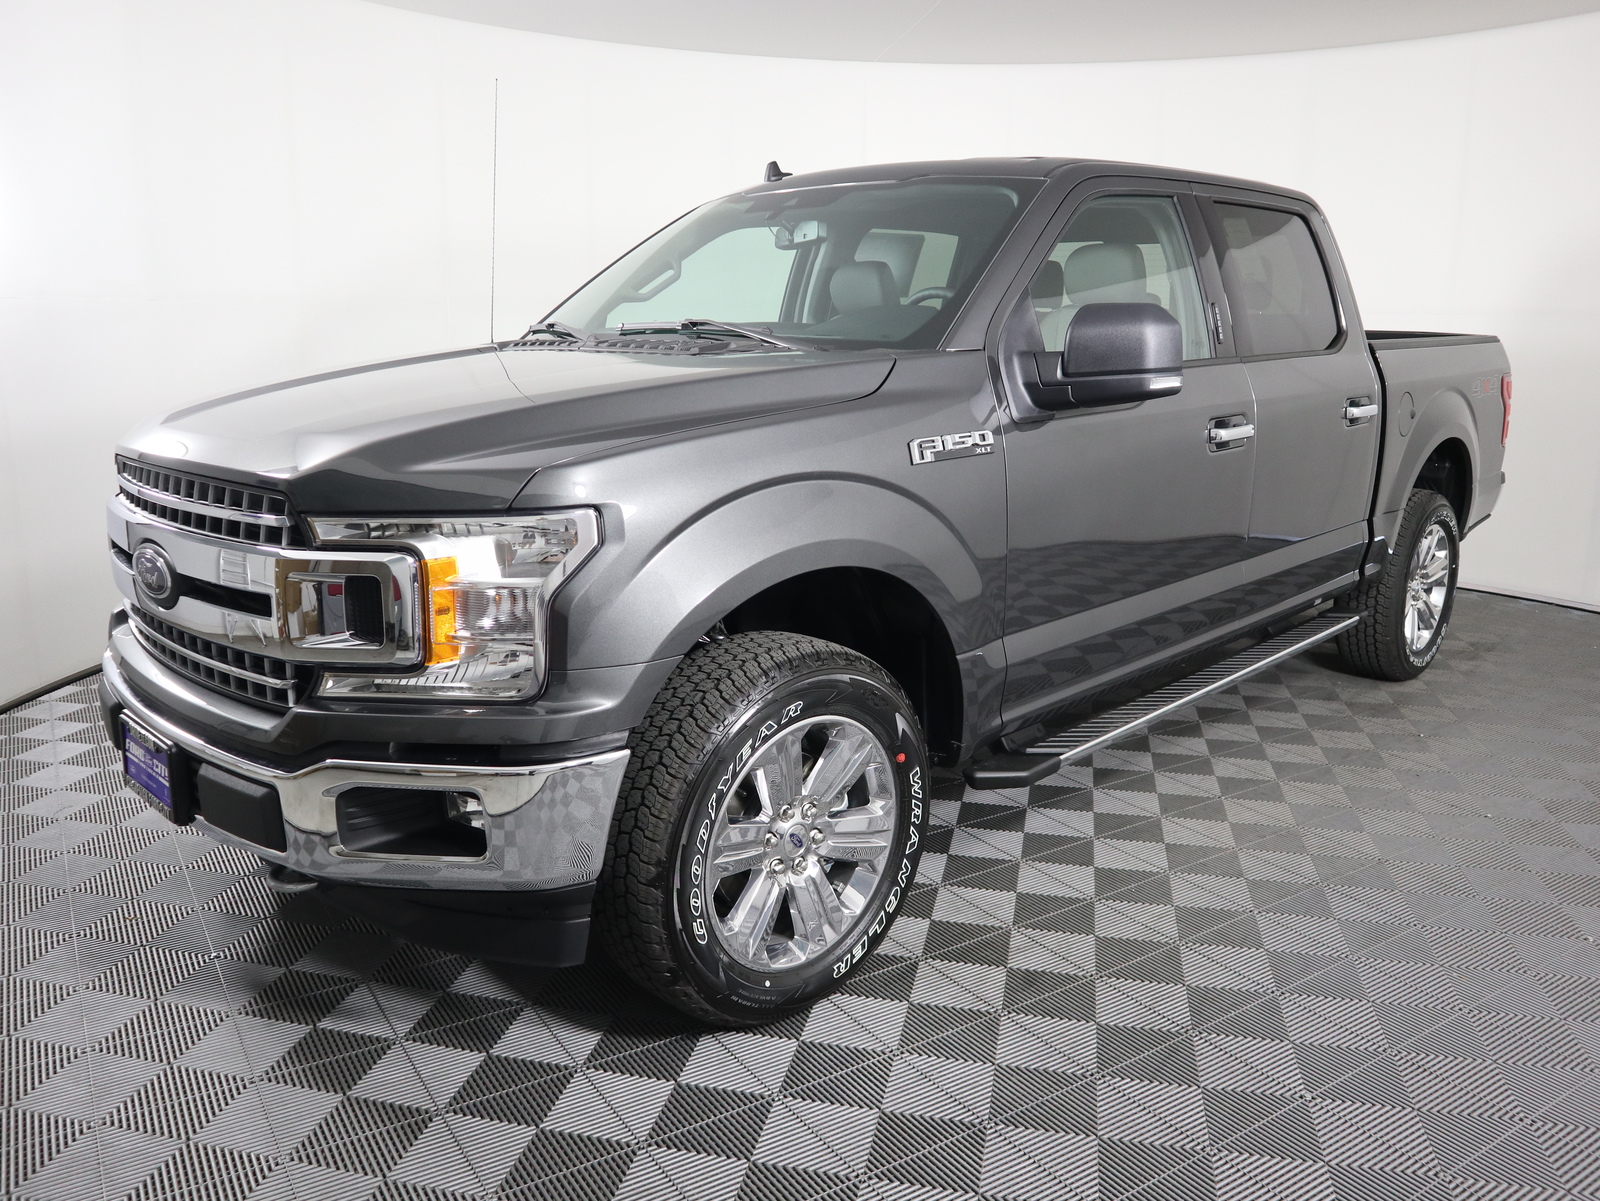 New 2020 Ford F-150 XLT 4WD SuperCrew 5.5' Box Crew Cab Pickup in Savoy 2020 F 150 Xlt 4x4 Towing Capacity